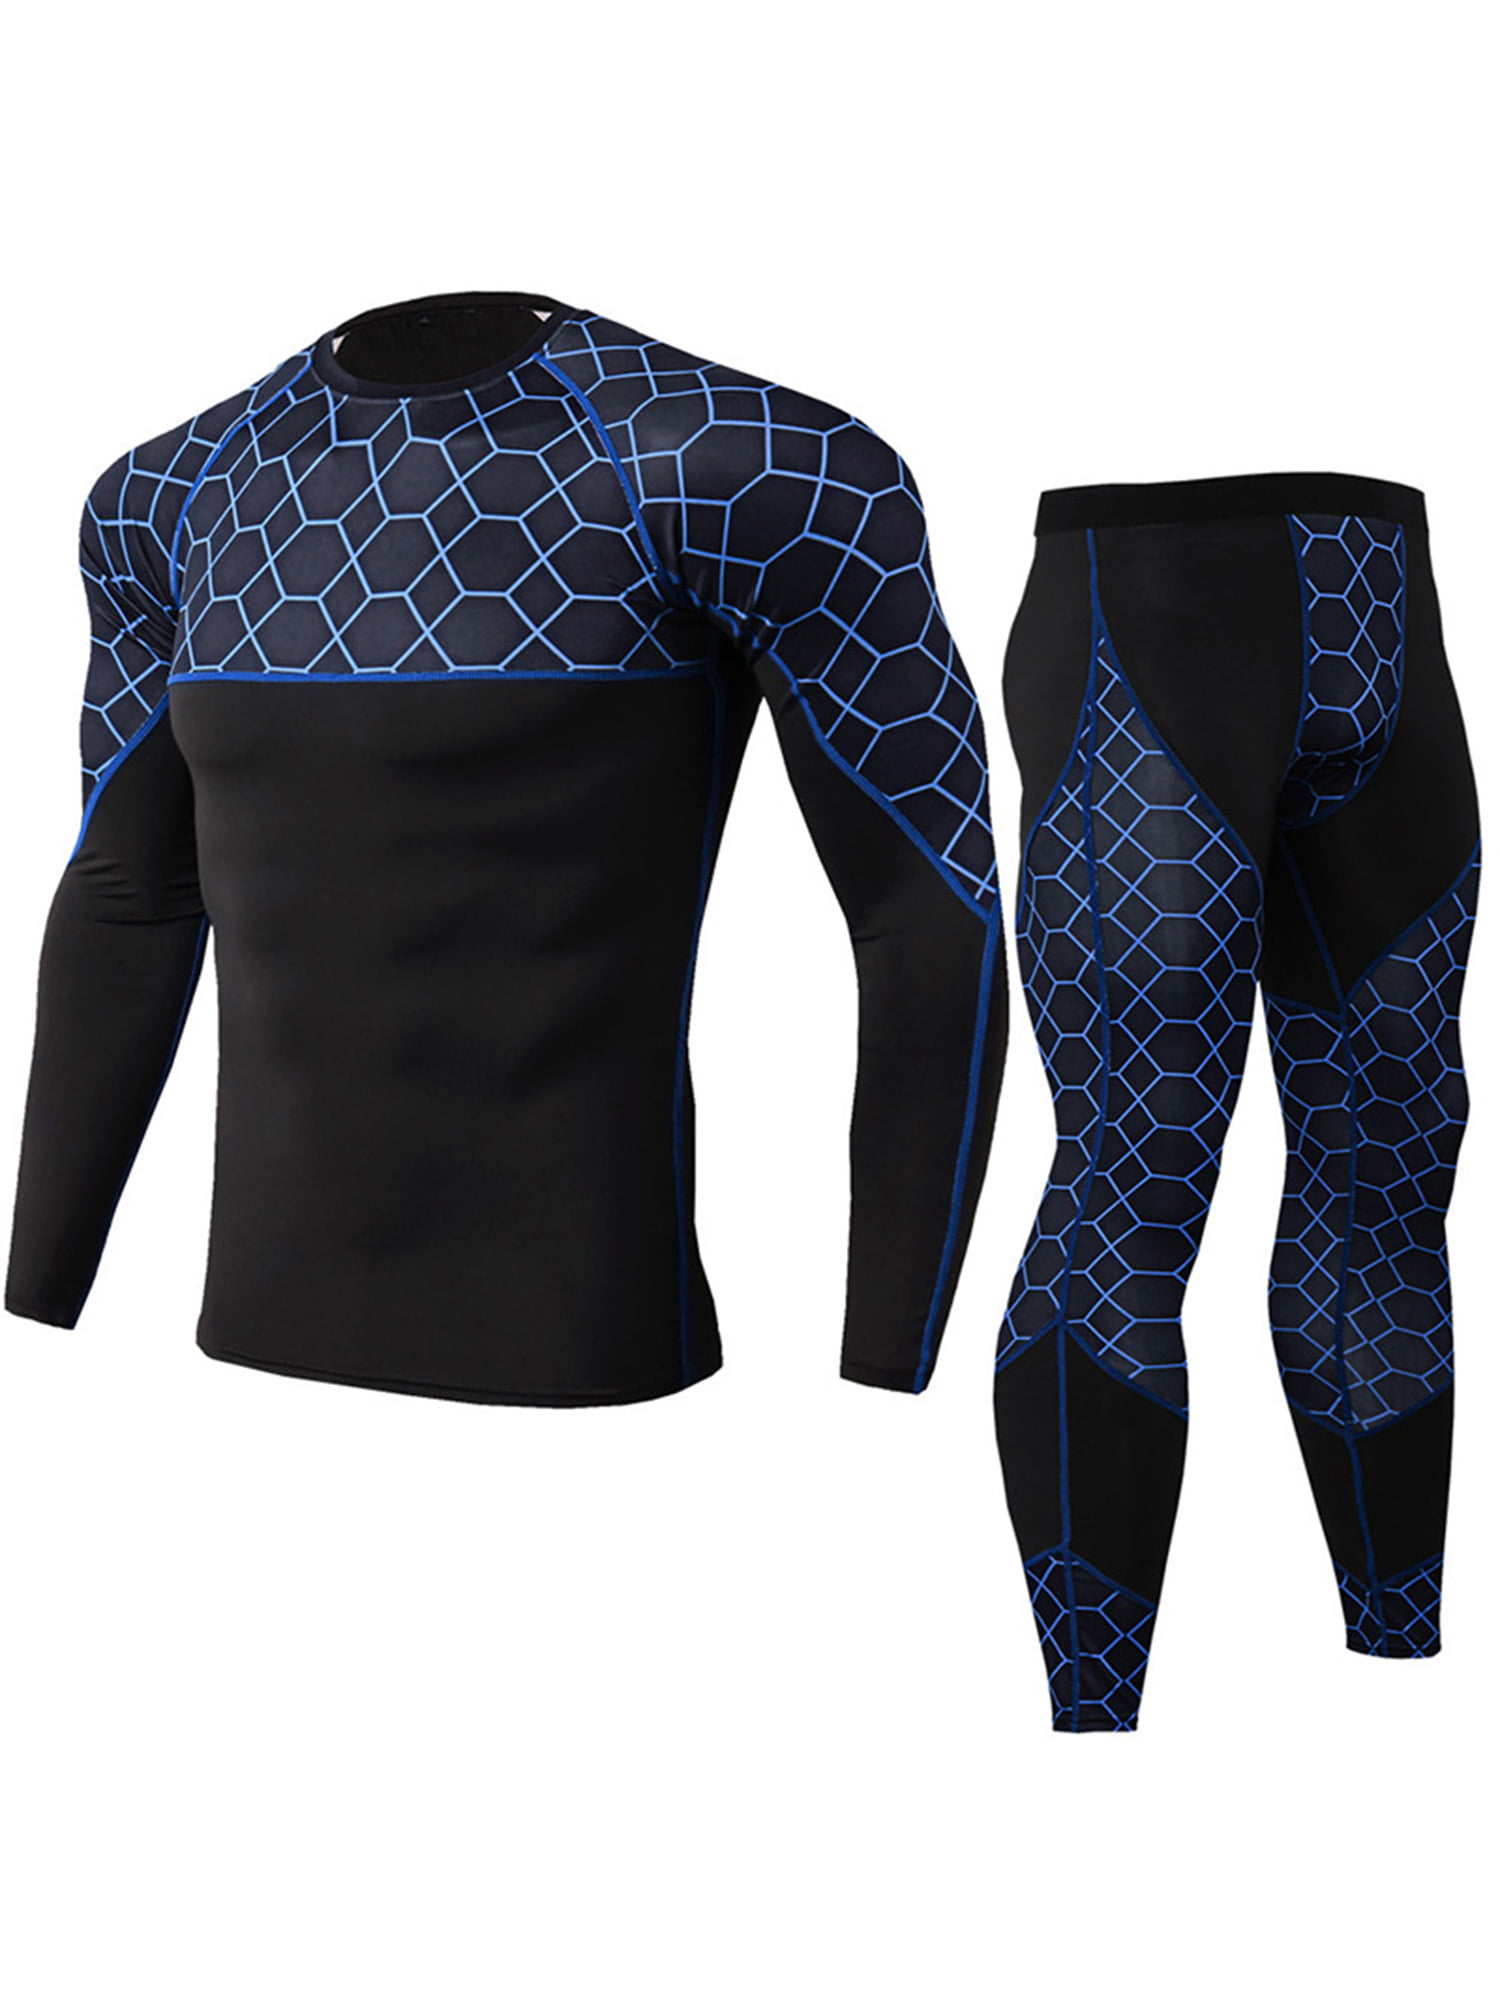 Men T-Shirt Compression Long Sleeve Top and Pants Gym Fitness Sport Clothing